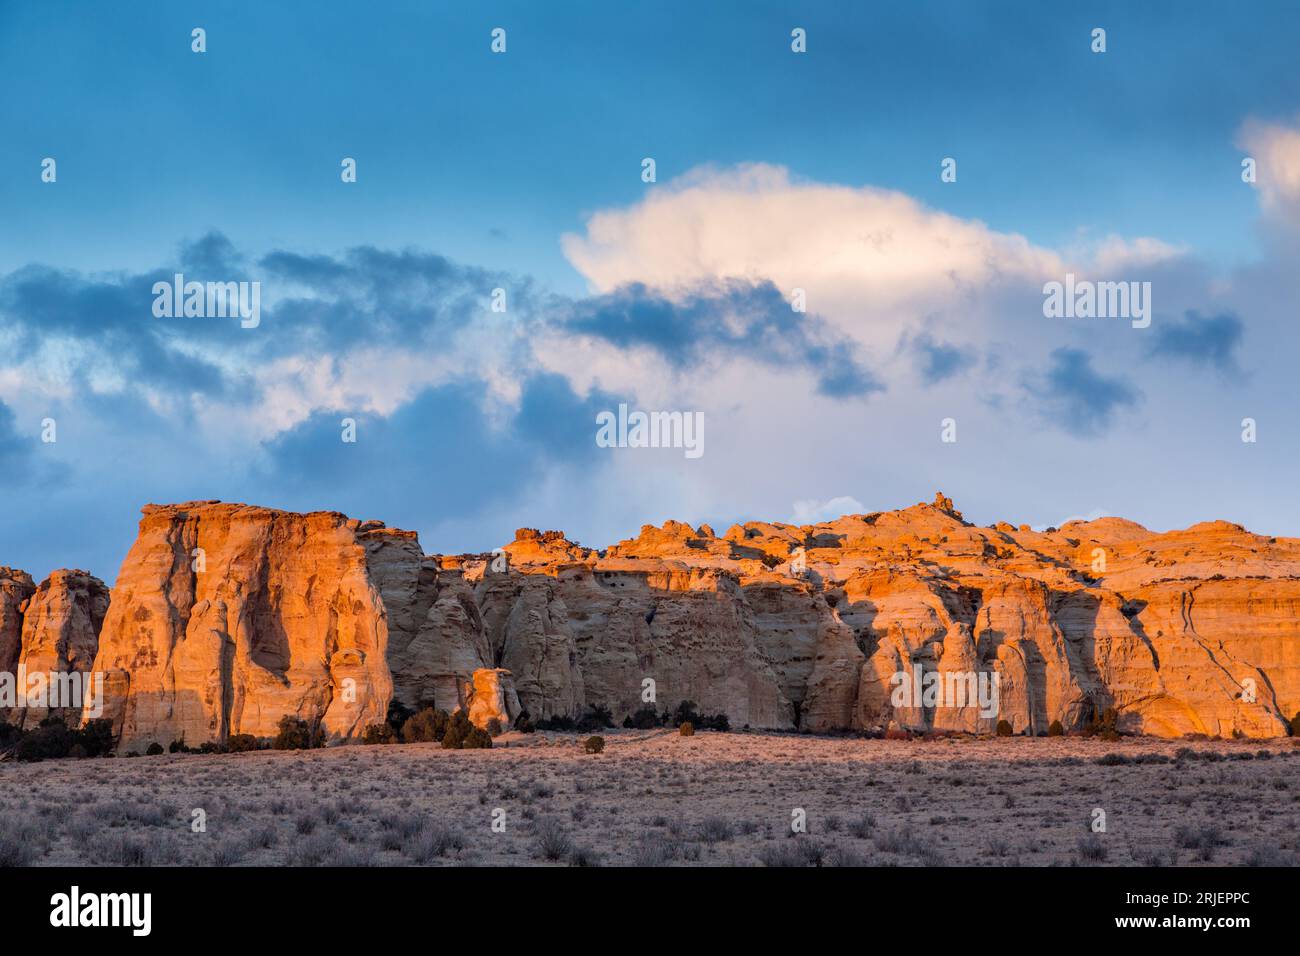 Colorful sculpted Navajo Sandstone formations at sunset in the Head of Sinbad area of the San Rafael Swell in Utah. Stock Photo